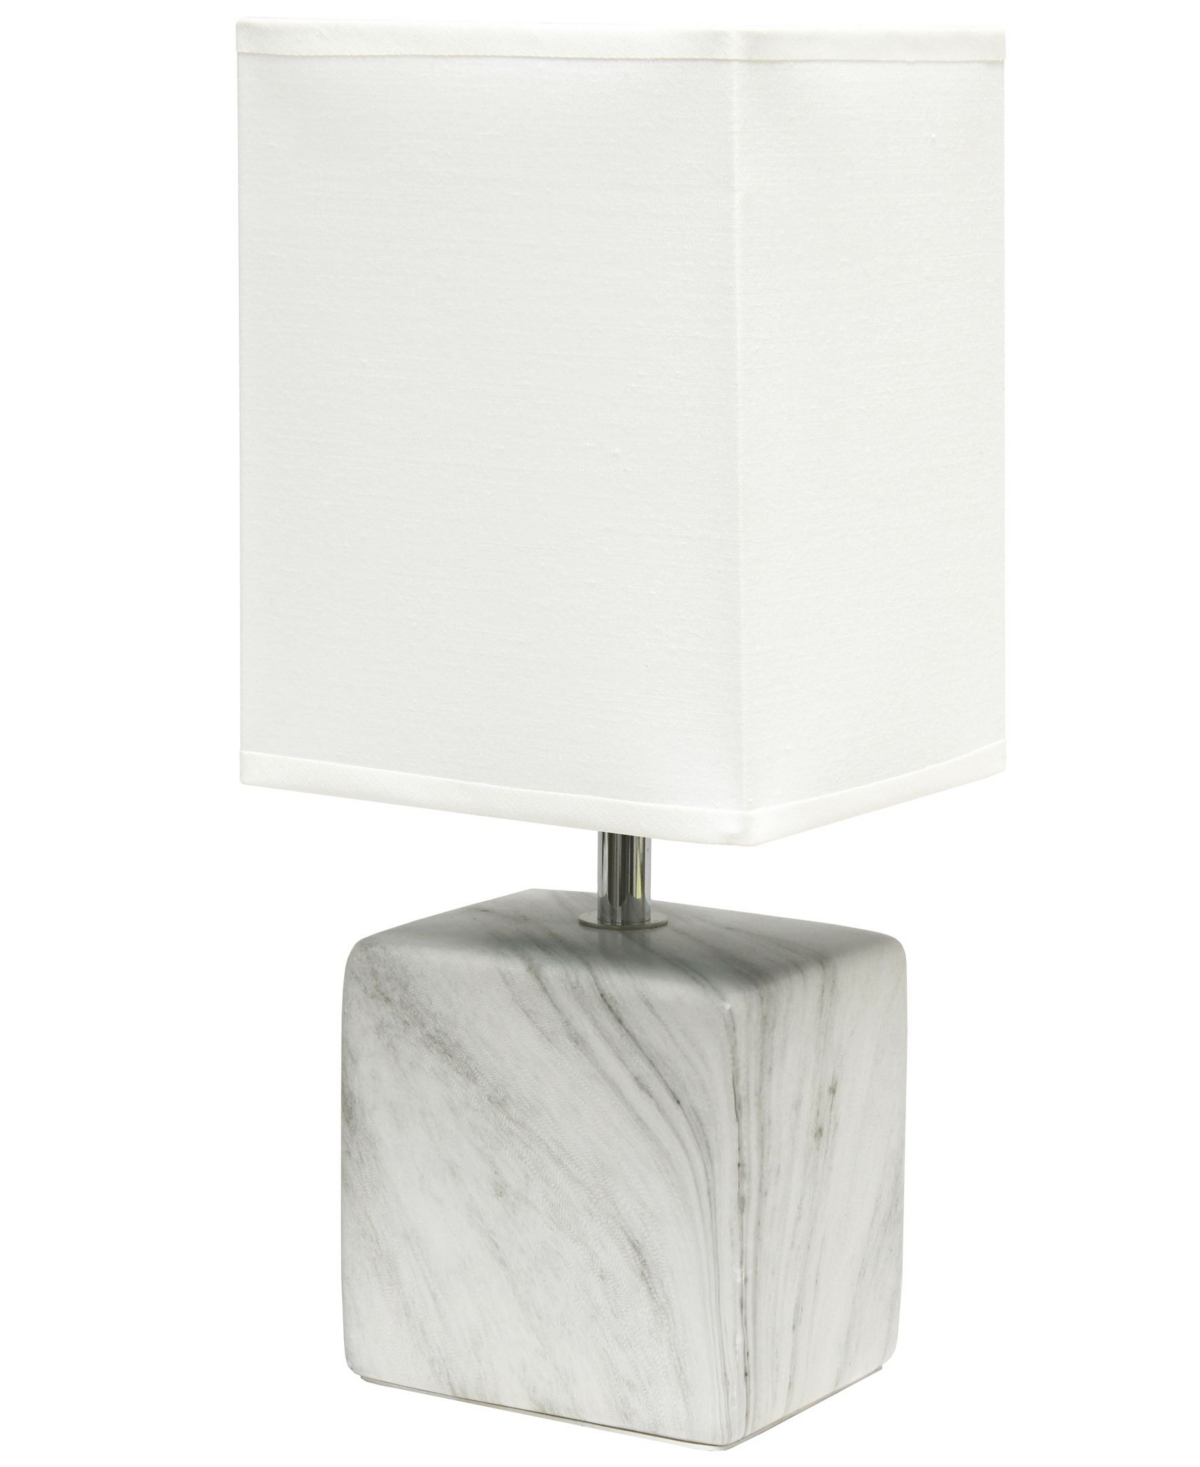 Simple Designs Petite Table Lamp With Shade In White Base,white Shade